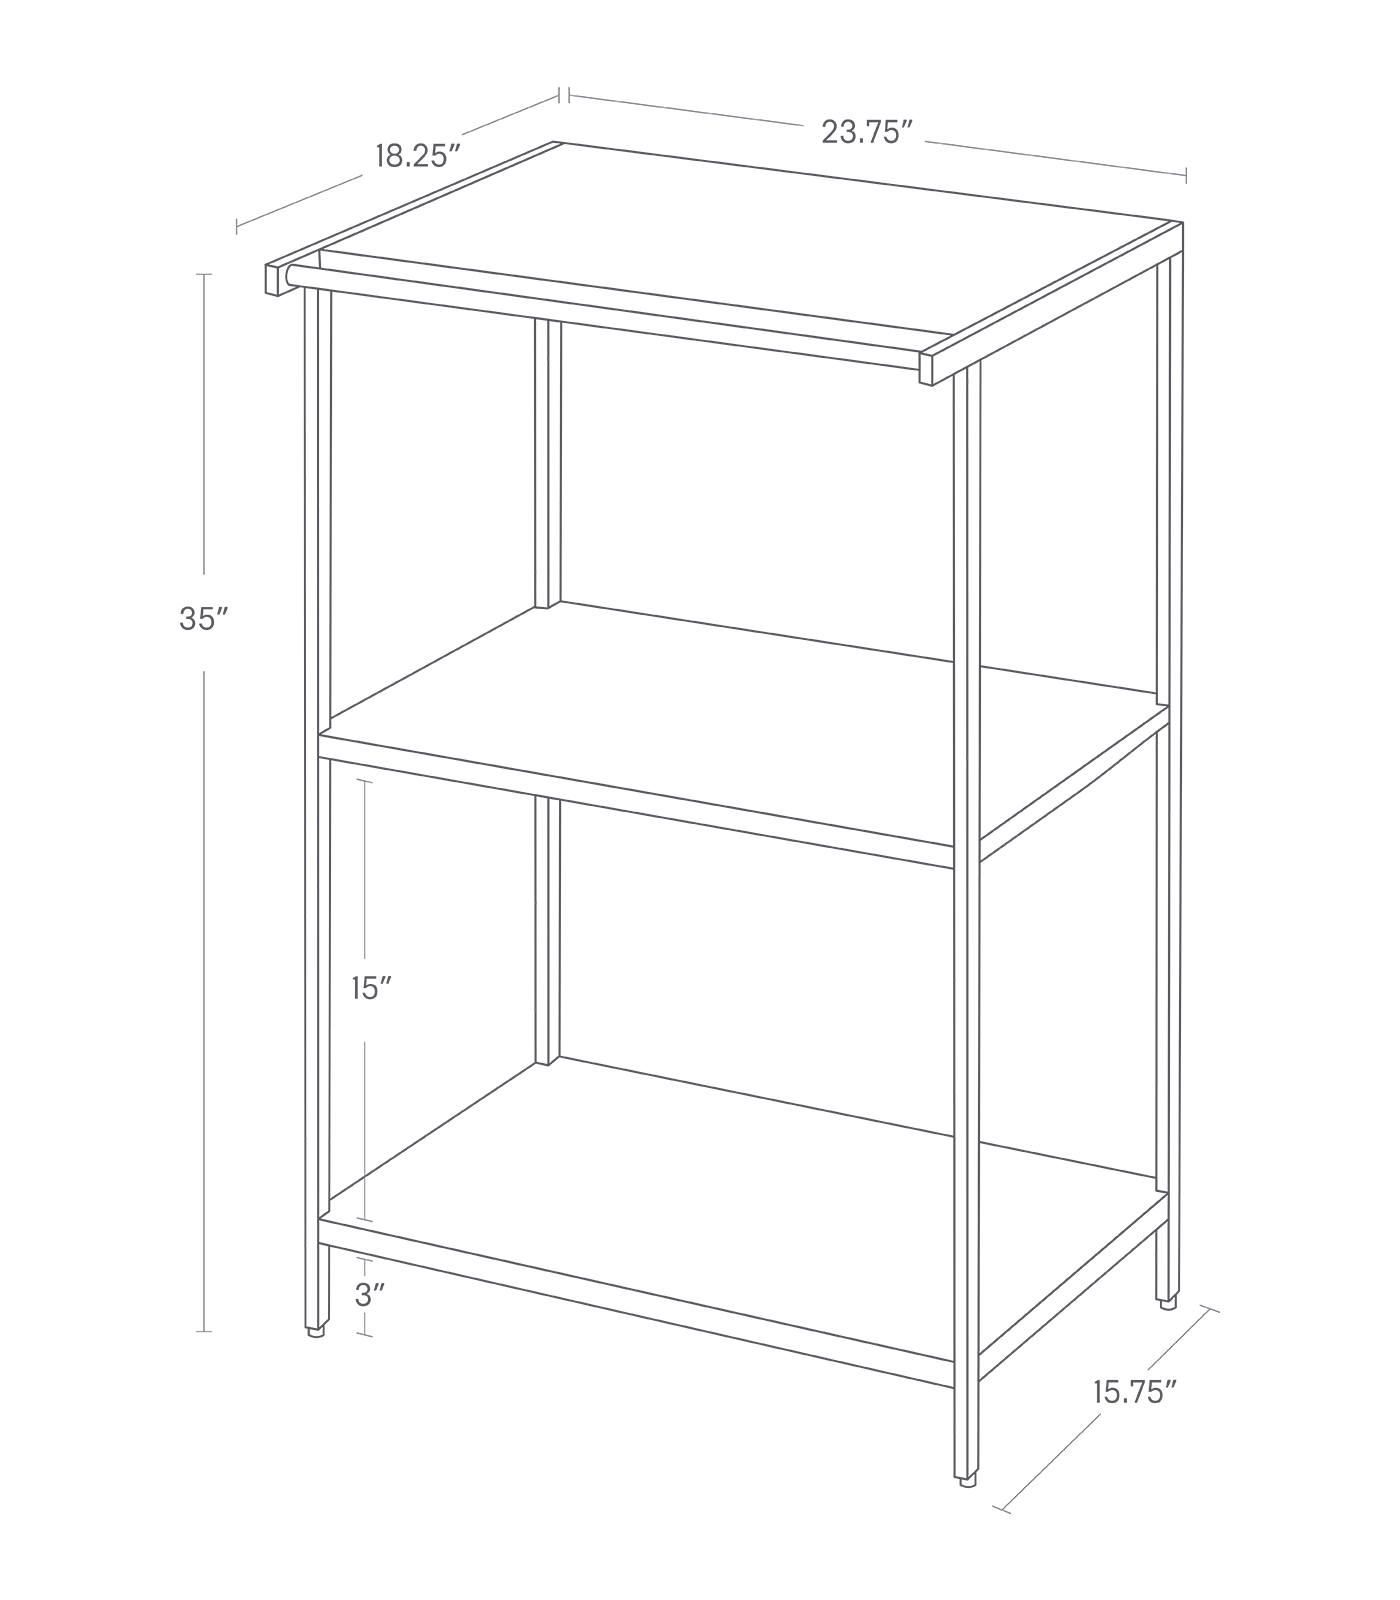 Dimension image for Storage Rack - Three Sizes on a white background including dimensions  L 18.31 x W 23.62 x H 35.43 inches